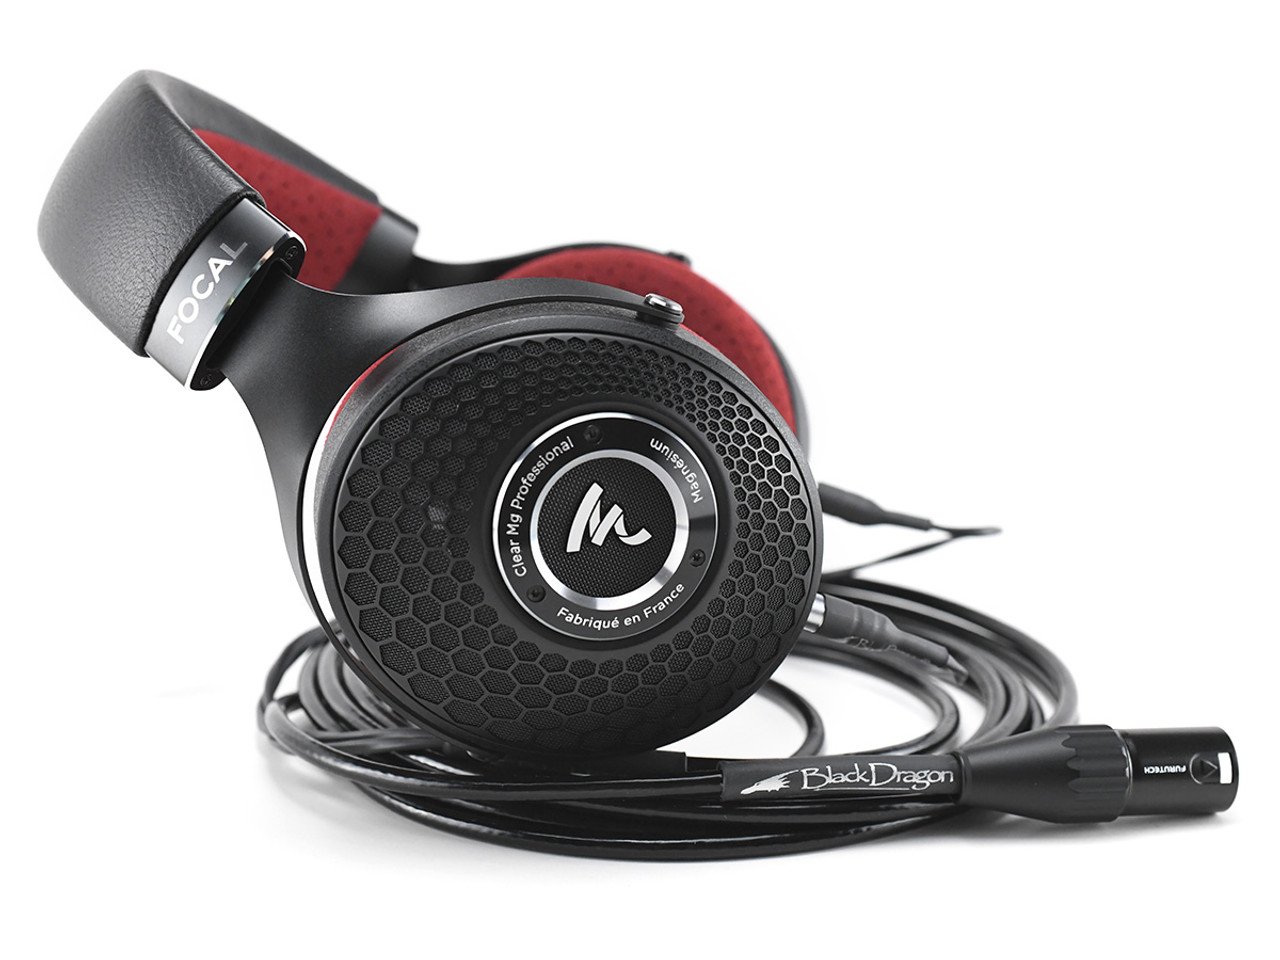 Focal Clear MG Pro